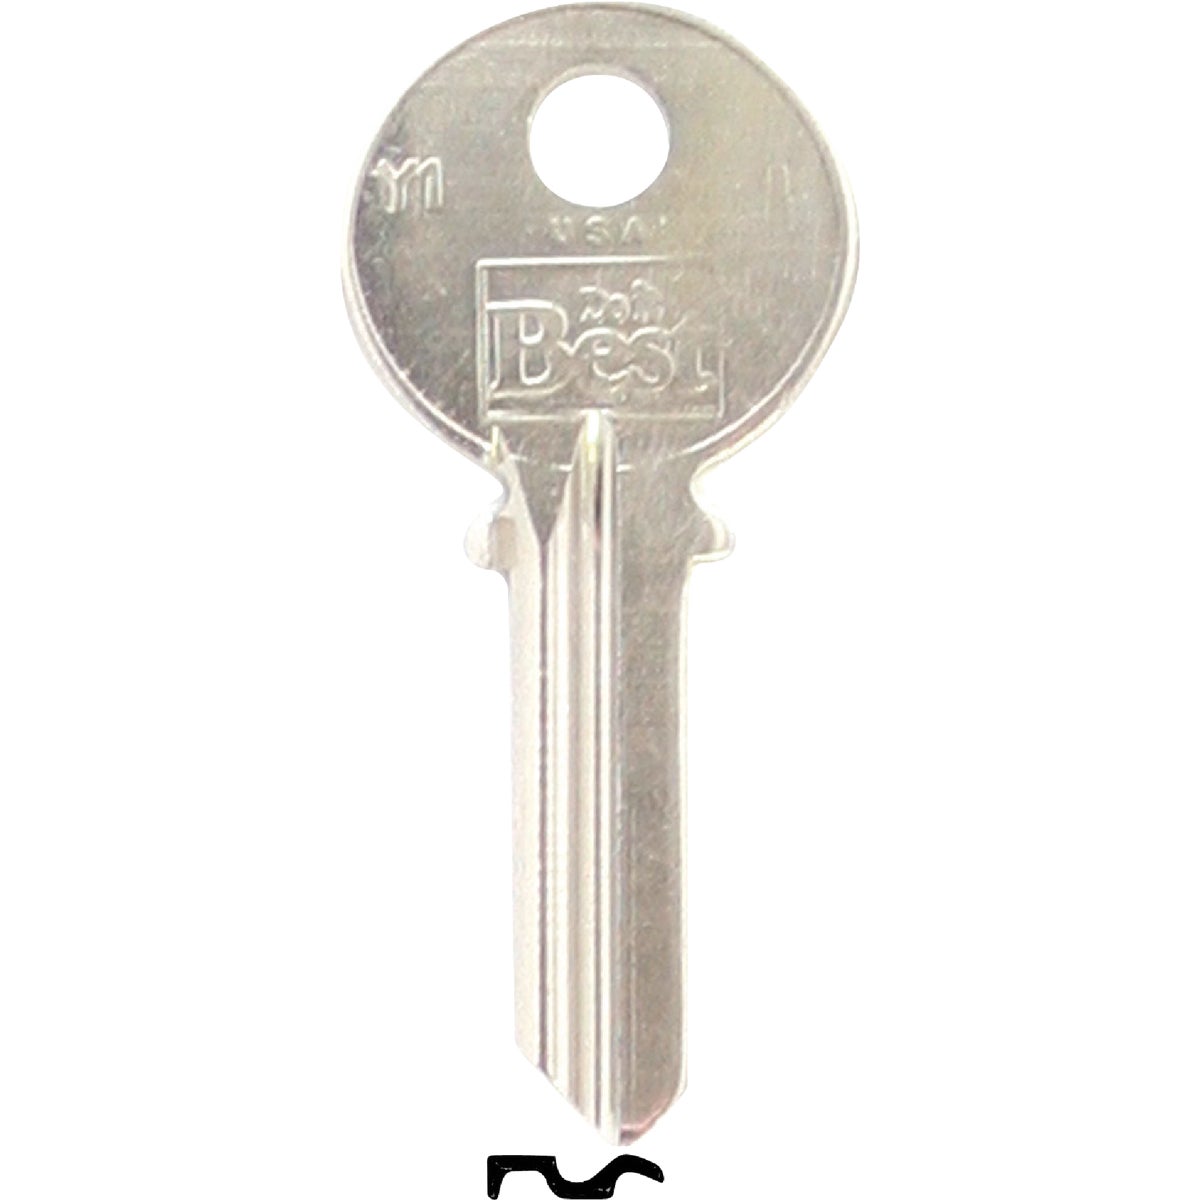 Item 237372, Nickel-plated key blank. When you order one, you will receive 10 keys.